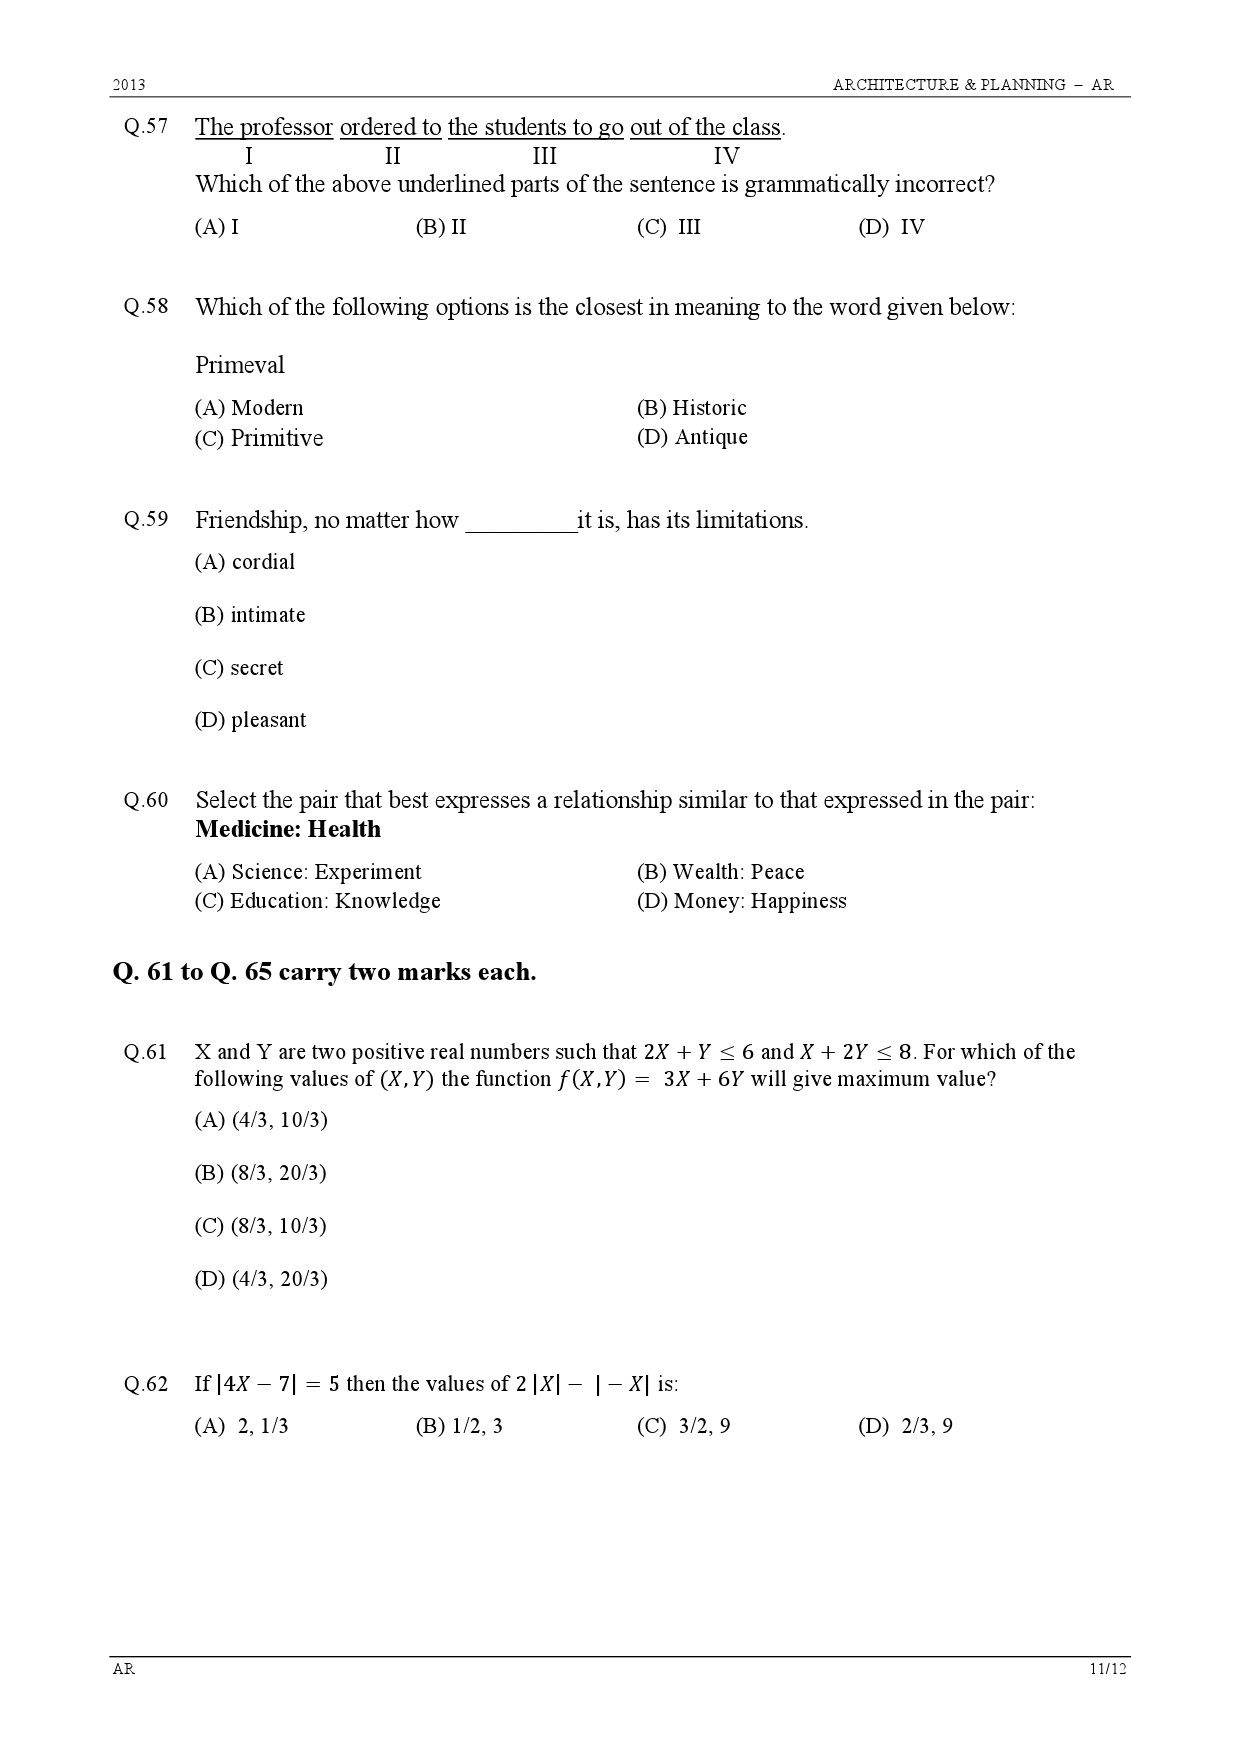 GATE Exam Question Paper 2013 Architecture and Planning 11